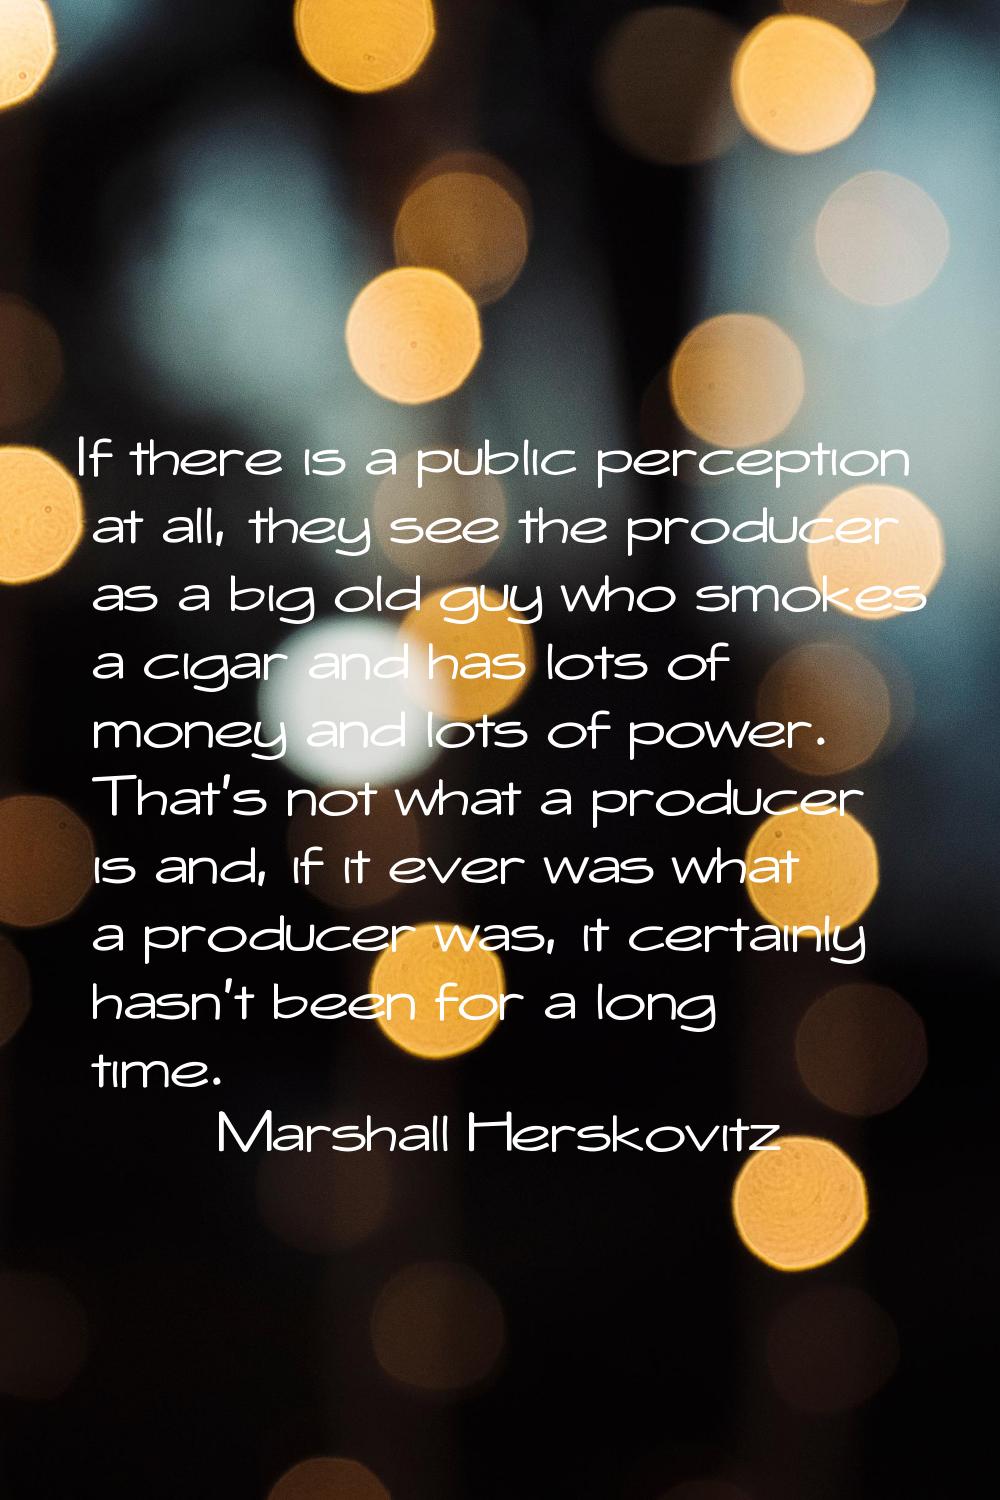 If there is a public perception at all, they see the producer as a big old guy who smokes a cigar a